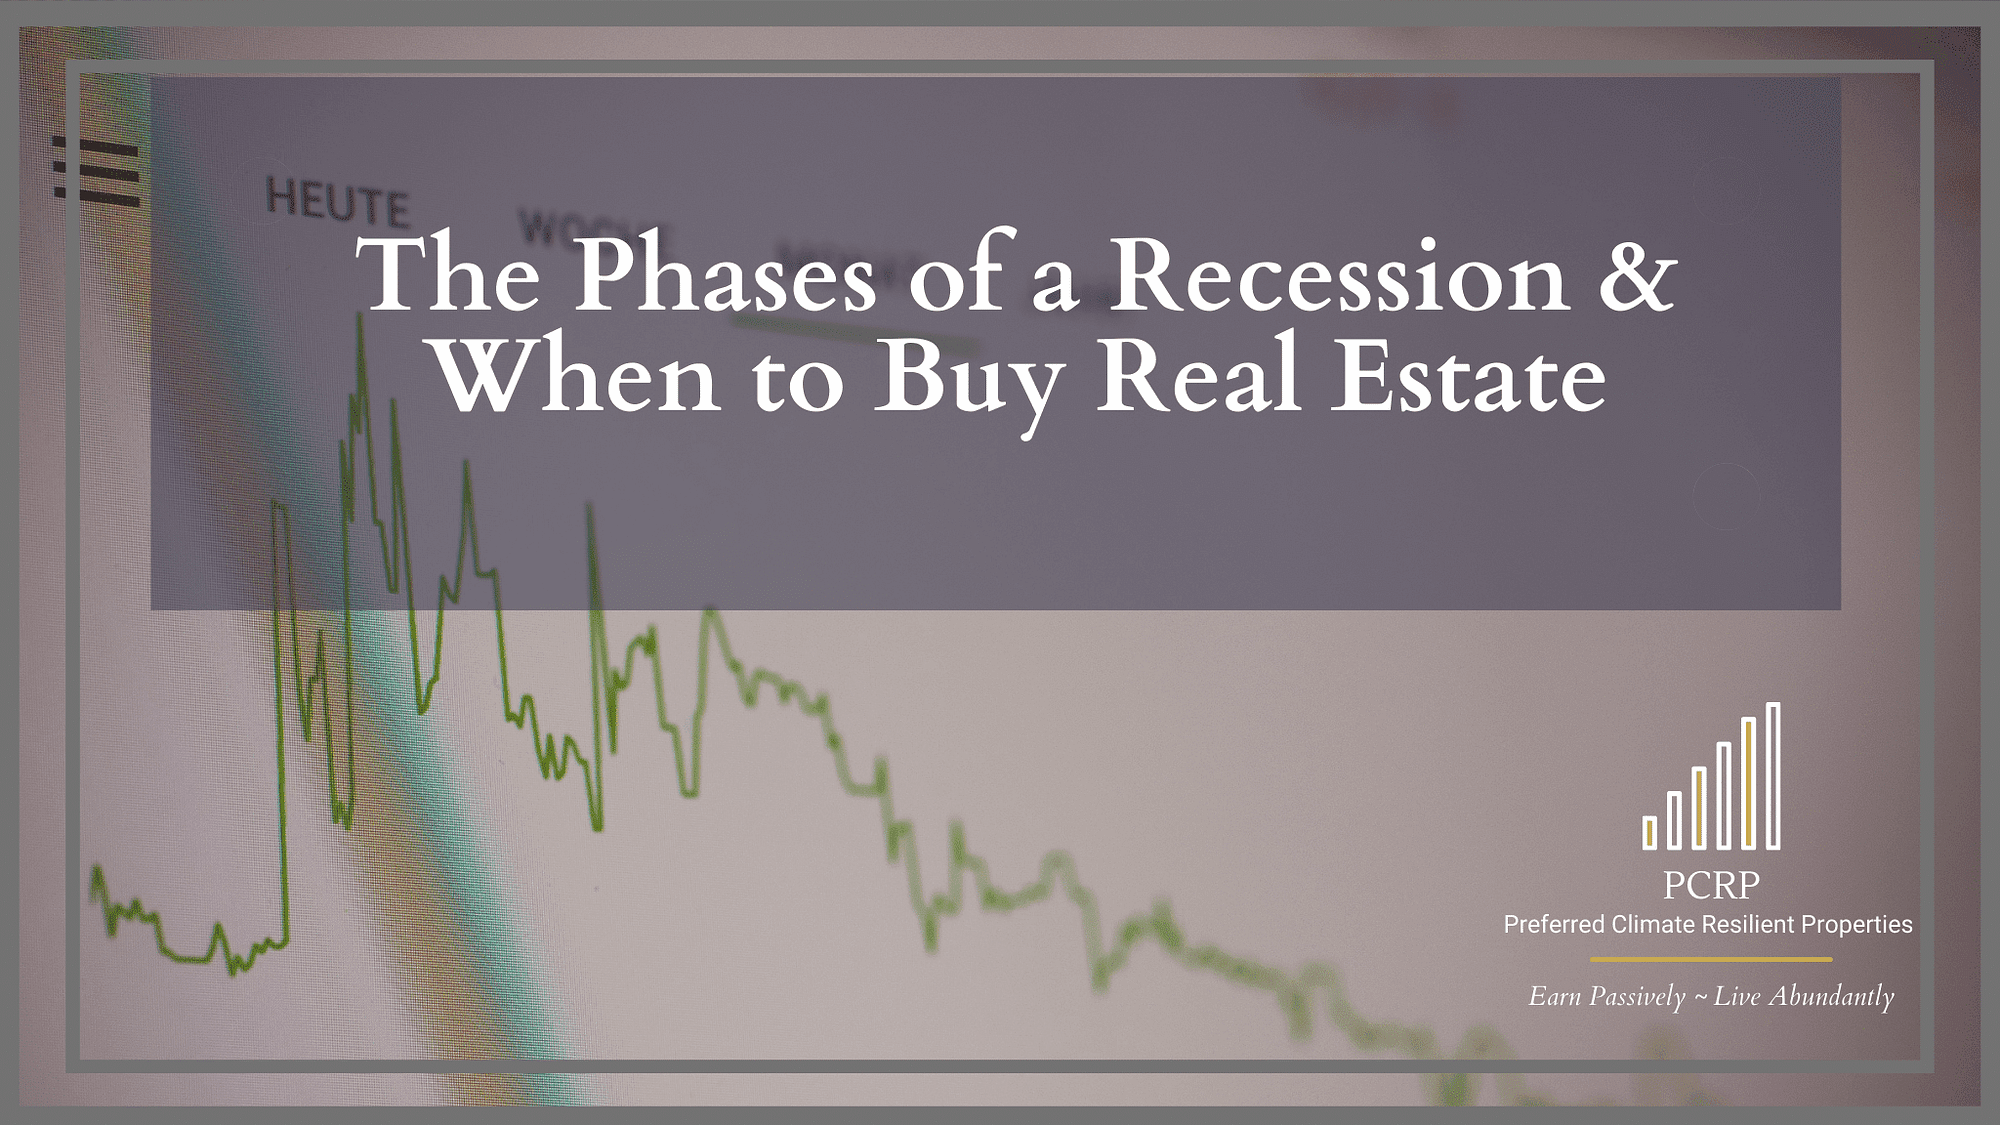 The phases of a recession & when to buy real estate